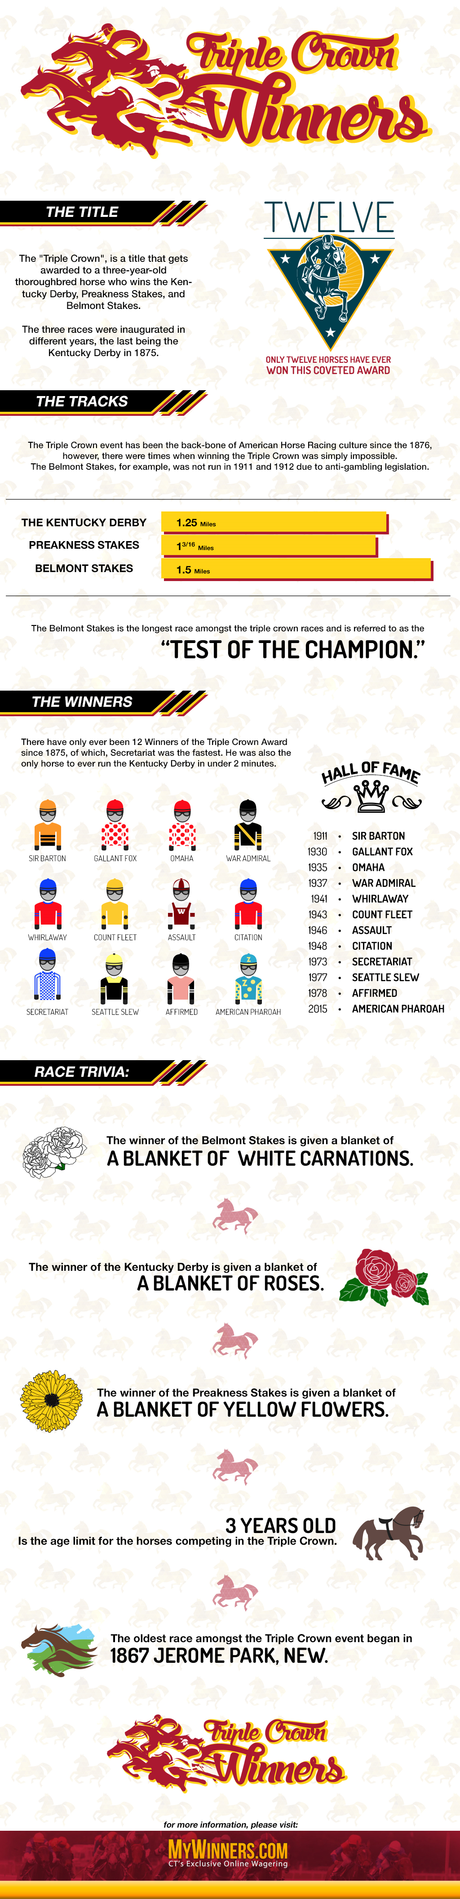 Triple Crown Facts & Figures Infographic